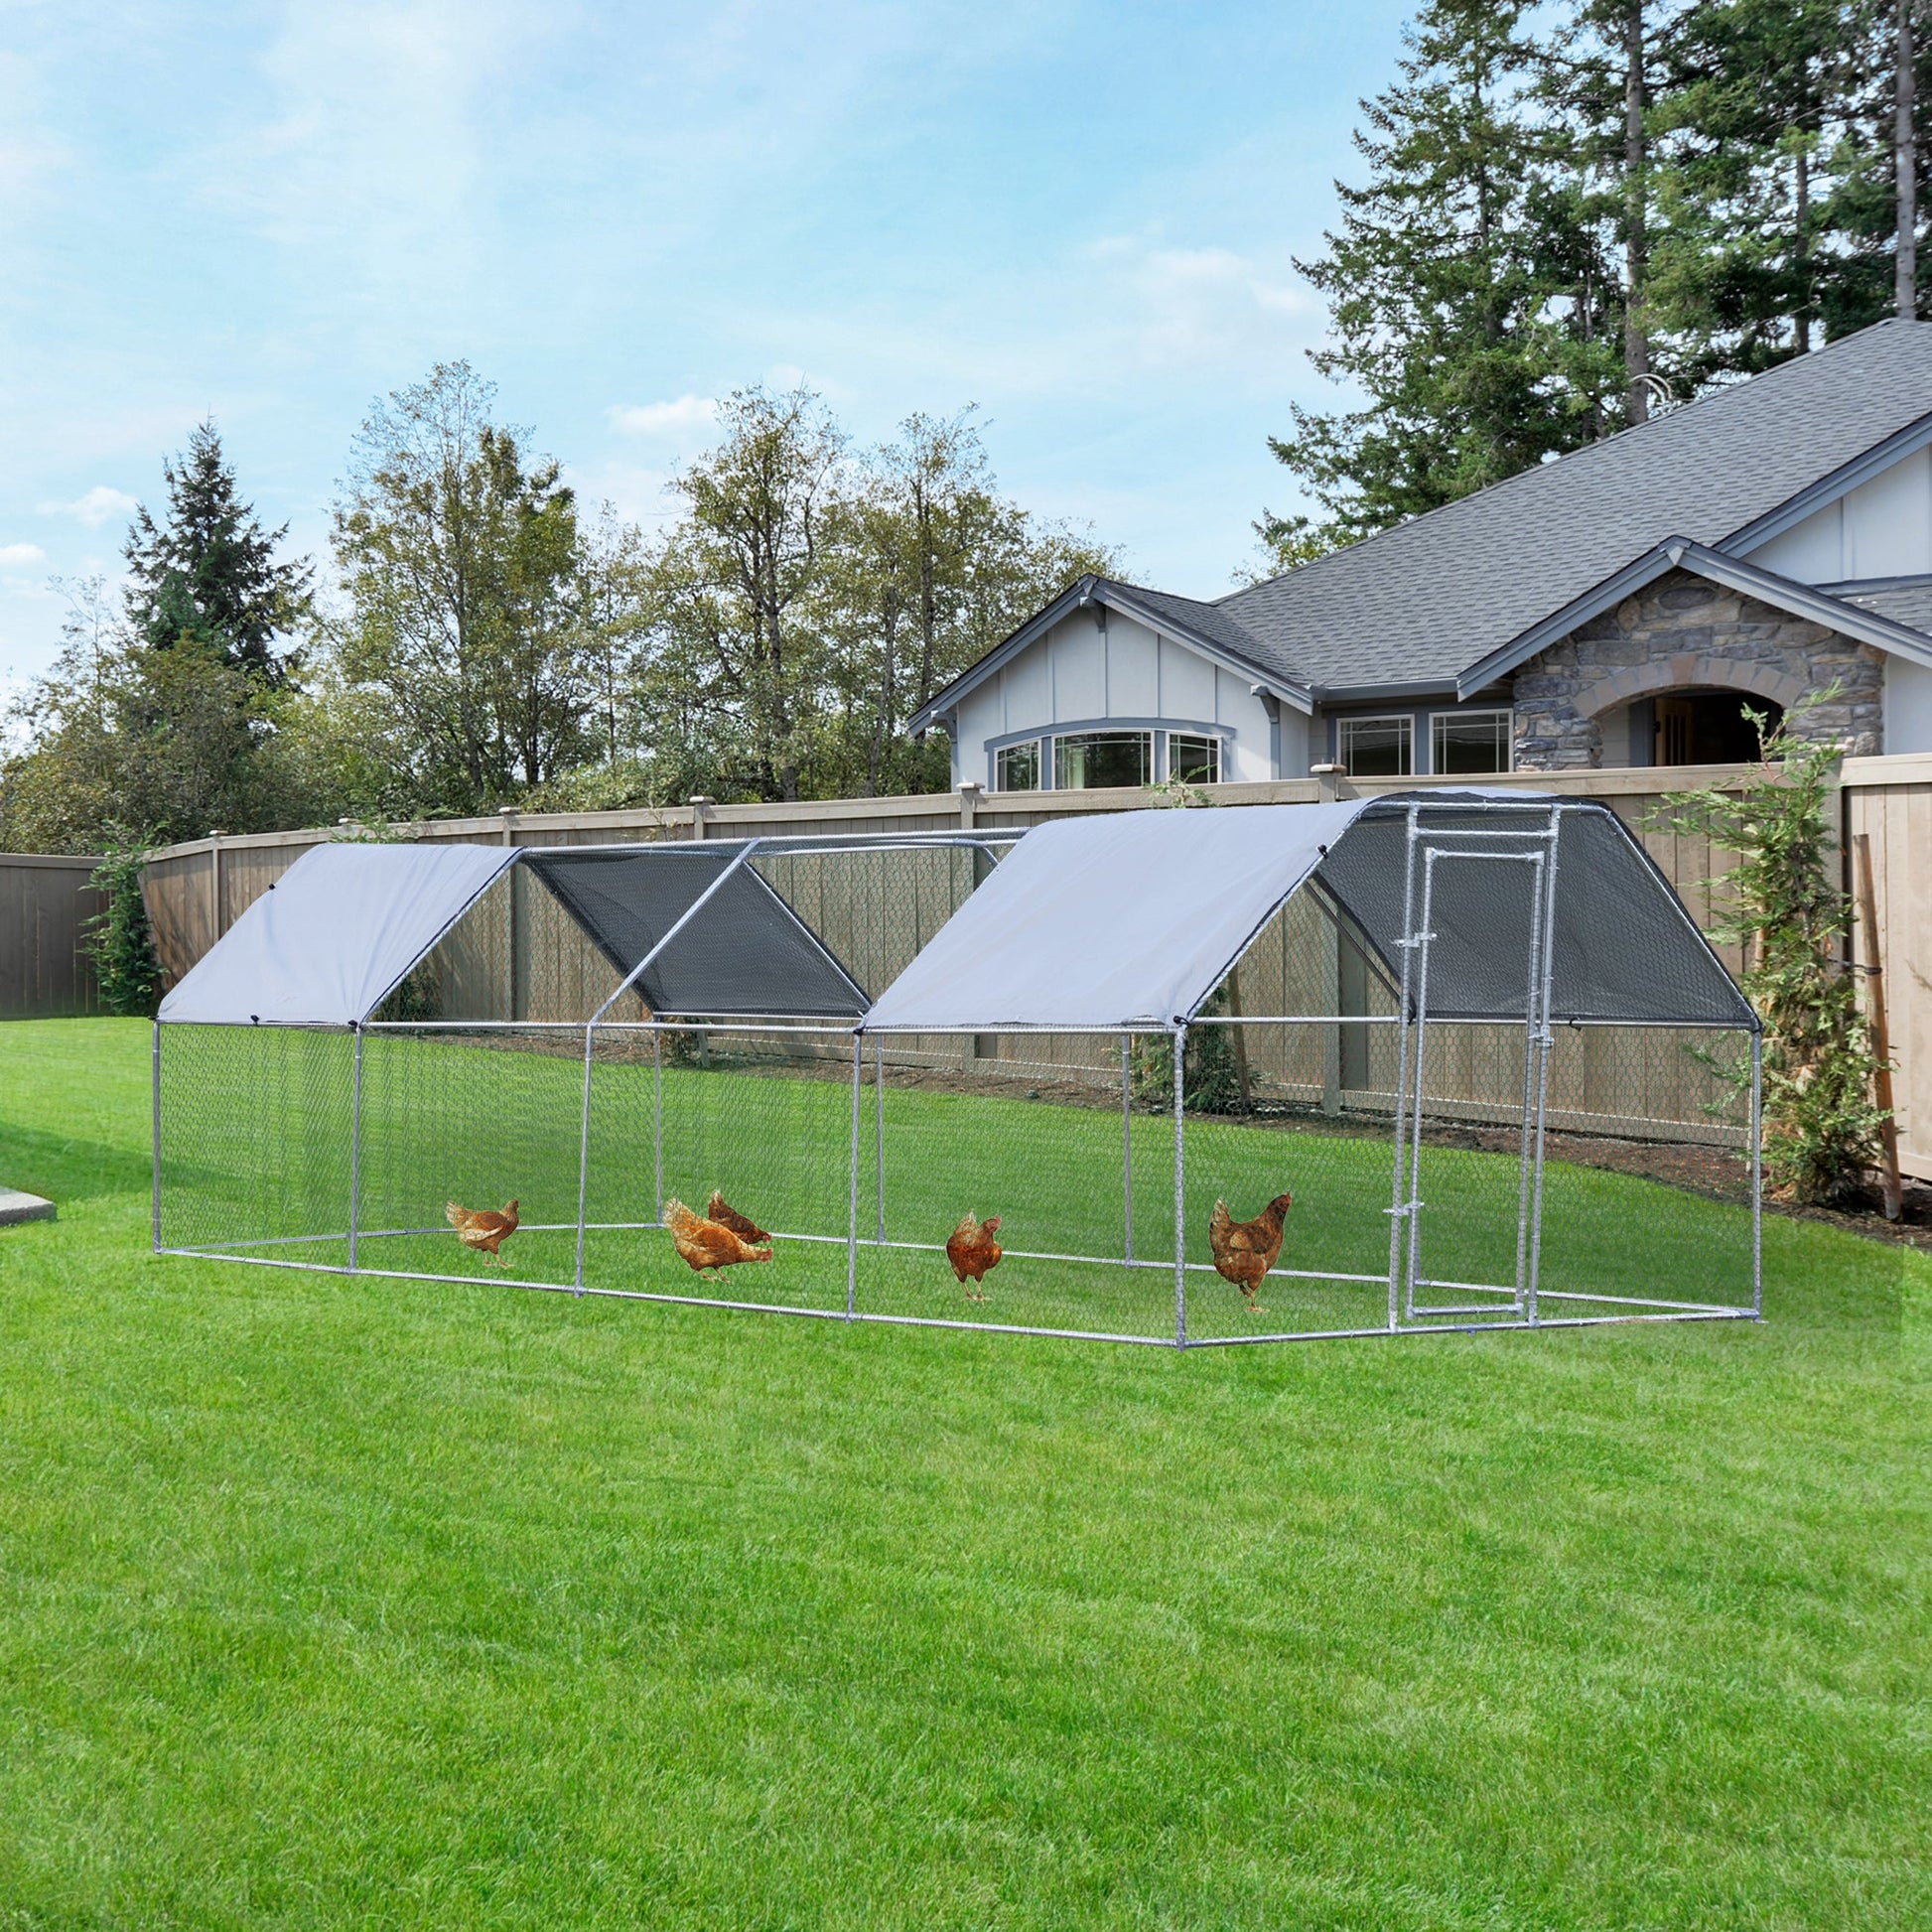 9.2' x 24.9' Metal Chicken Coop, Galvanized Walk-in Hen House, Poultry Cage Outdoor Backyard with Waterproof UV-Protection Cover for Rabbits, Ducks at Gallery Canada